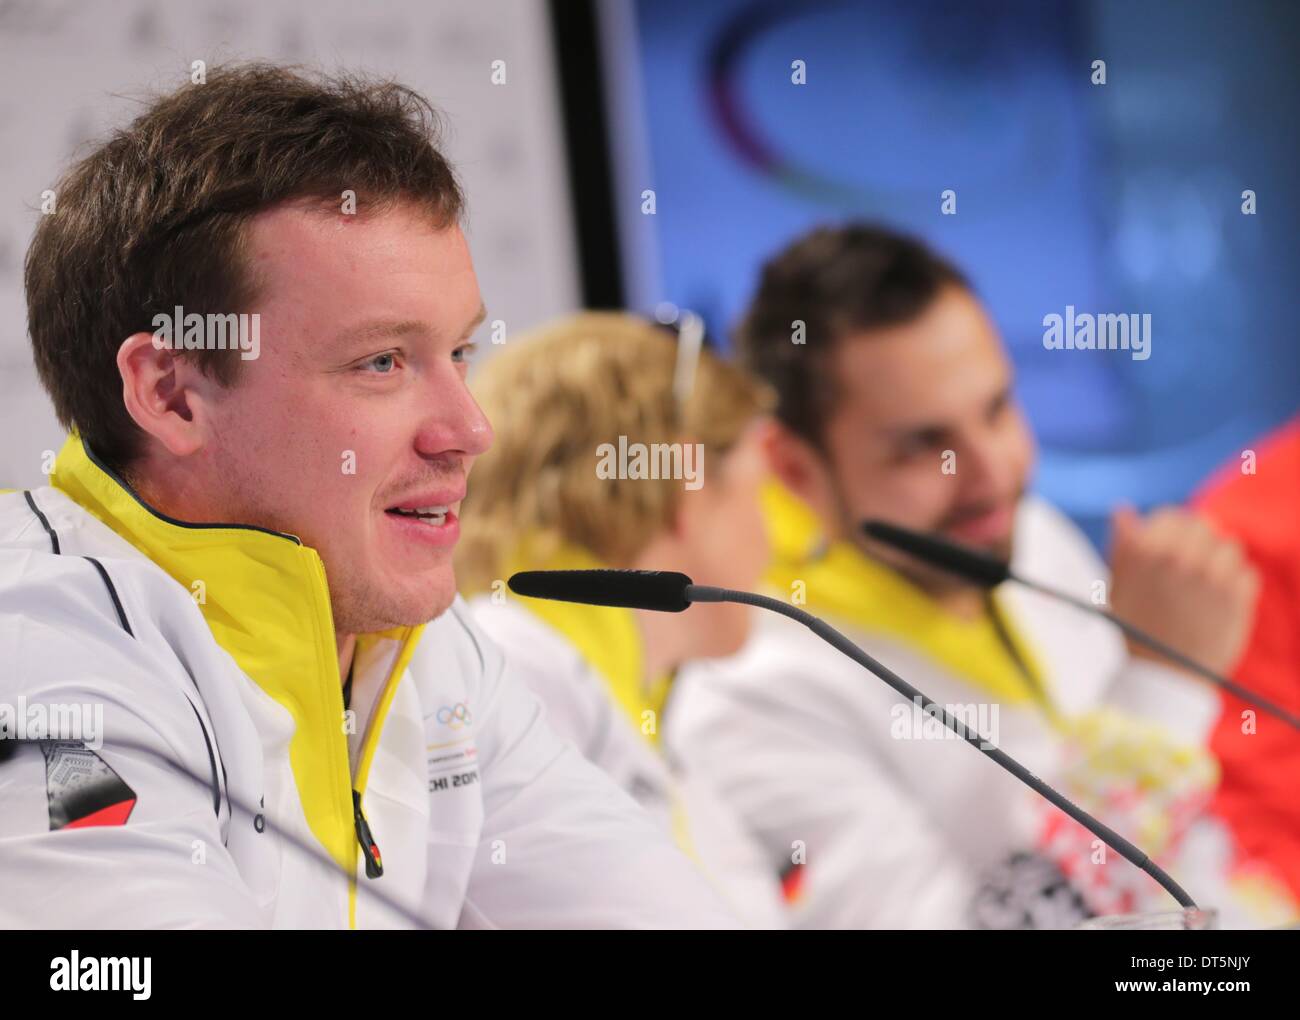 Krasnaya Polyana, Krasnodar region, Russia. 10th Feb, 2014. Felix Loch (L-R) , speed skater Claudia Pechstein, luger Andi Langenhan of Germany and Michael Vesper, Chef de Mission and Head of German Olympic Team, attend a press conference at the Deutsches Haus (German House) in Gorki Village near Krasnaya Polyana, Krasnodar region, Russia, 10 February 2014. Loch won the gold medal in the Luge Men's Singles Run at the Sochi 2014 Olympic Games on 09 February 2014. Photo: Kay Nietfeld/dpa/Alamy Live News Stock Photo